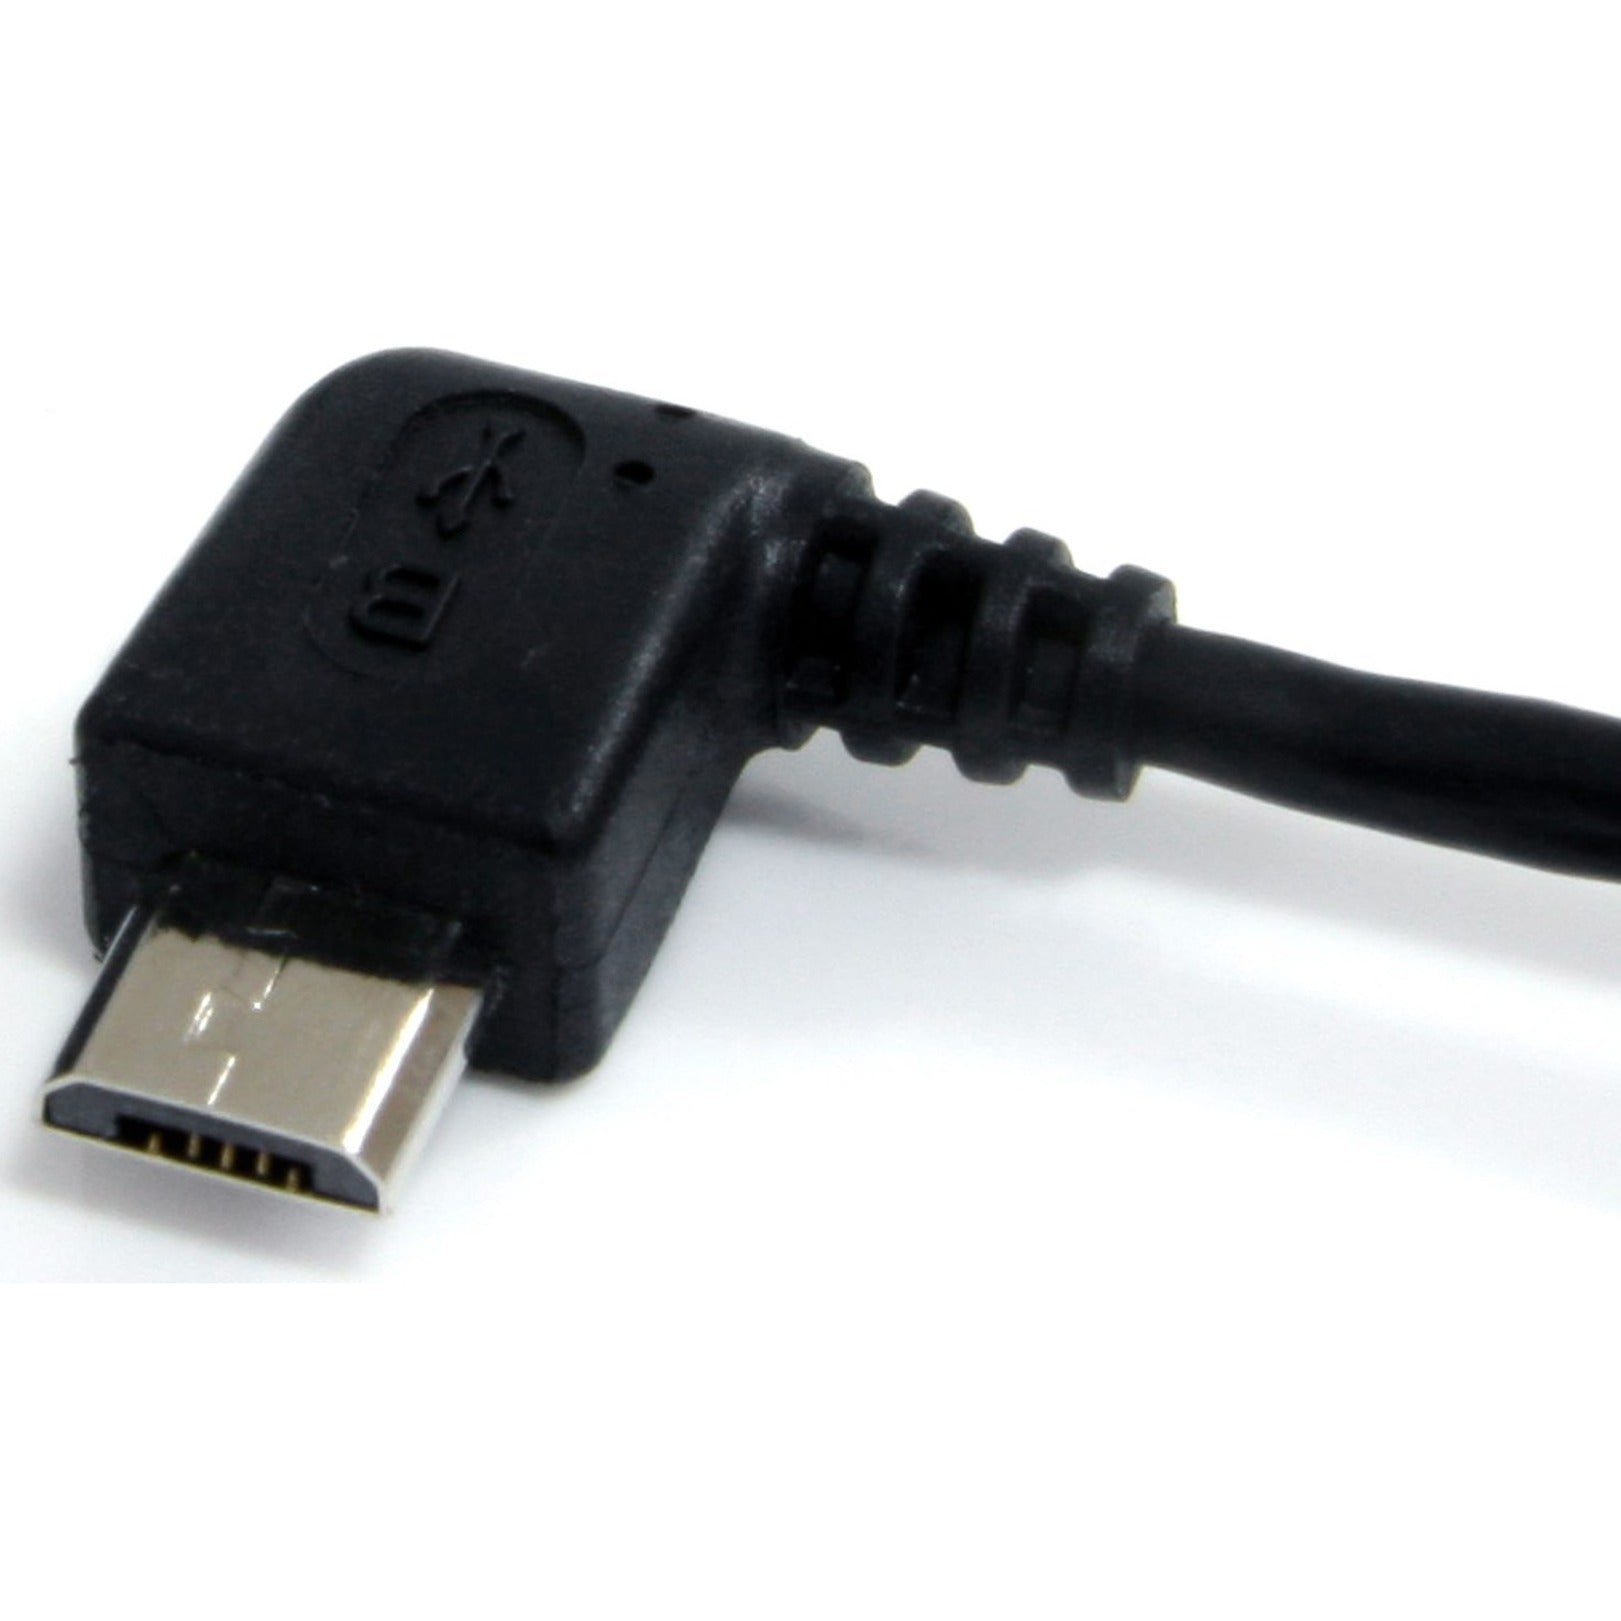 StarTech.com UUSBHAUB1LA 1 ft Micro USB Cable - A to Left Angle Micro B, Charging and Data Transfer, Black